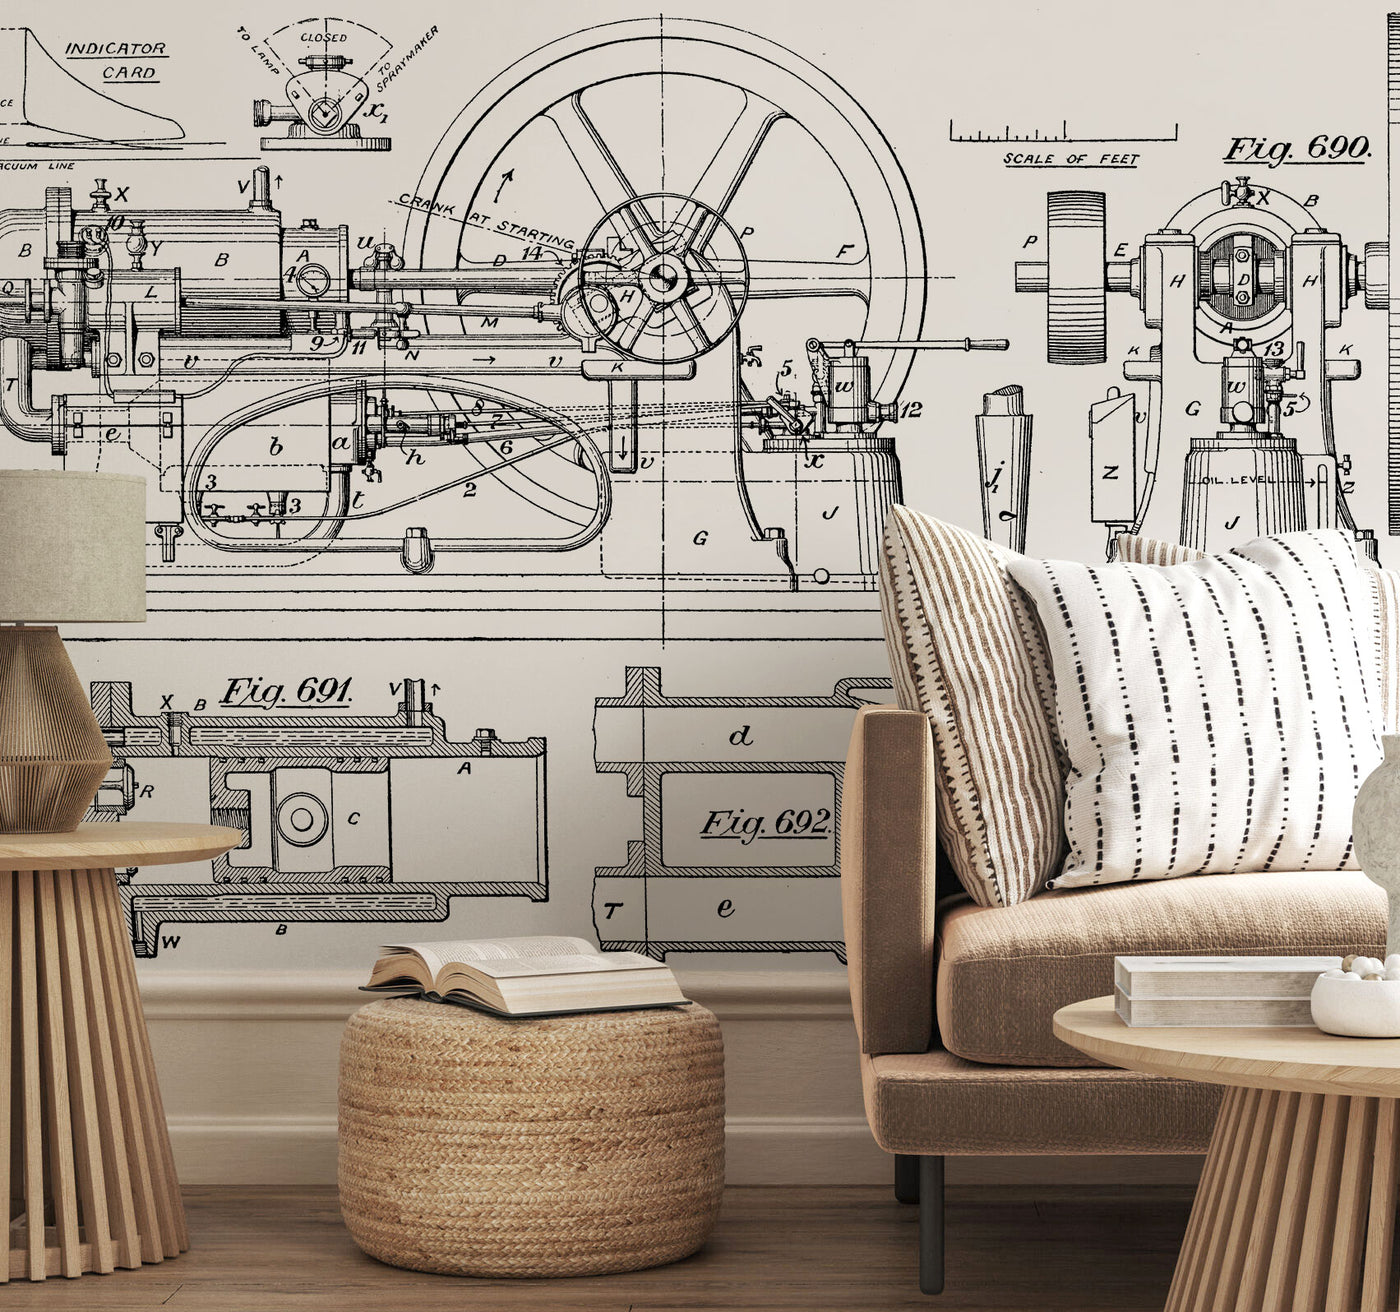 Black and White Vintage Steam Engine Blueprint Wall Mural